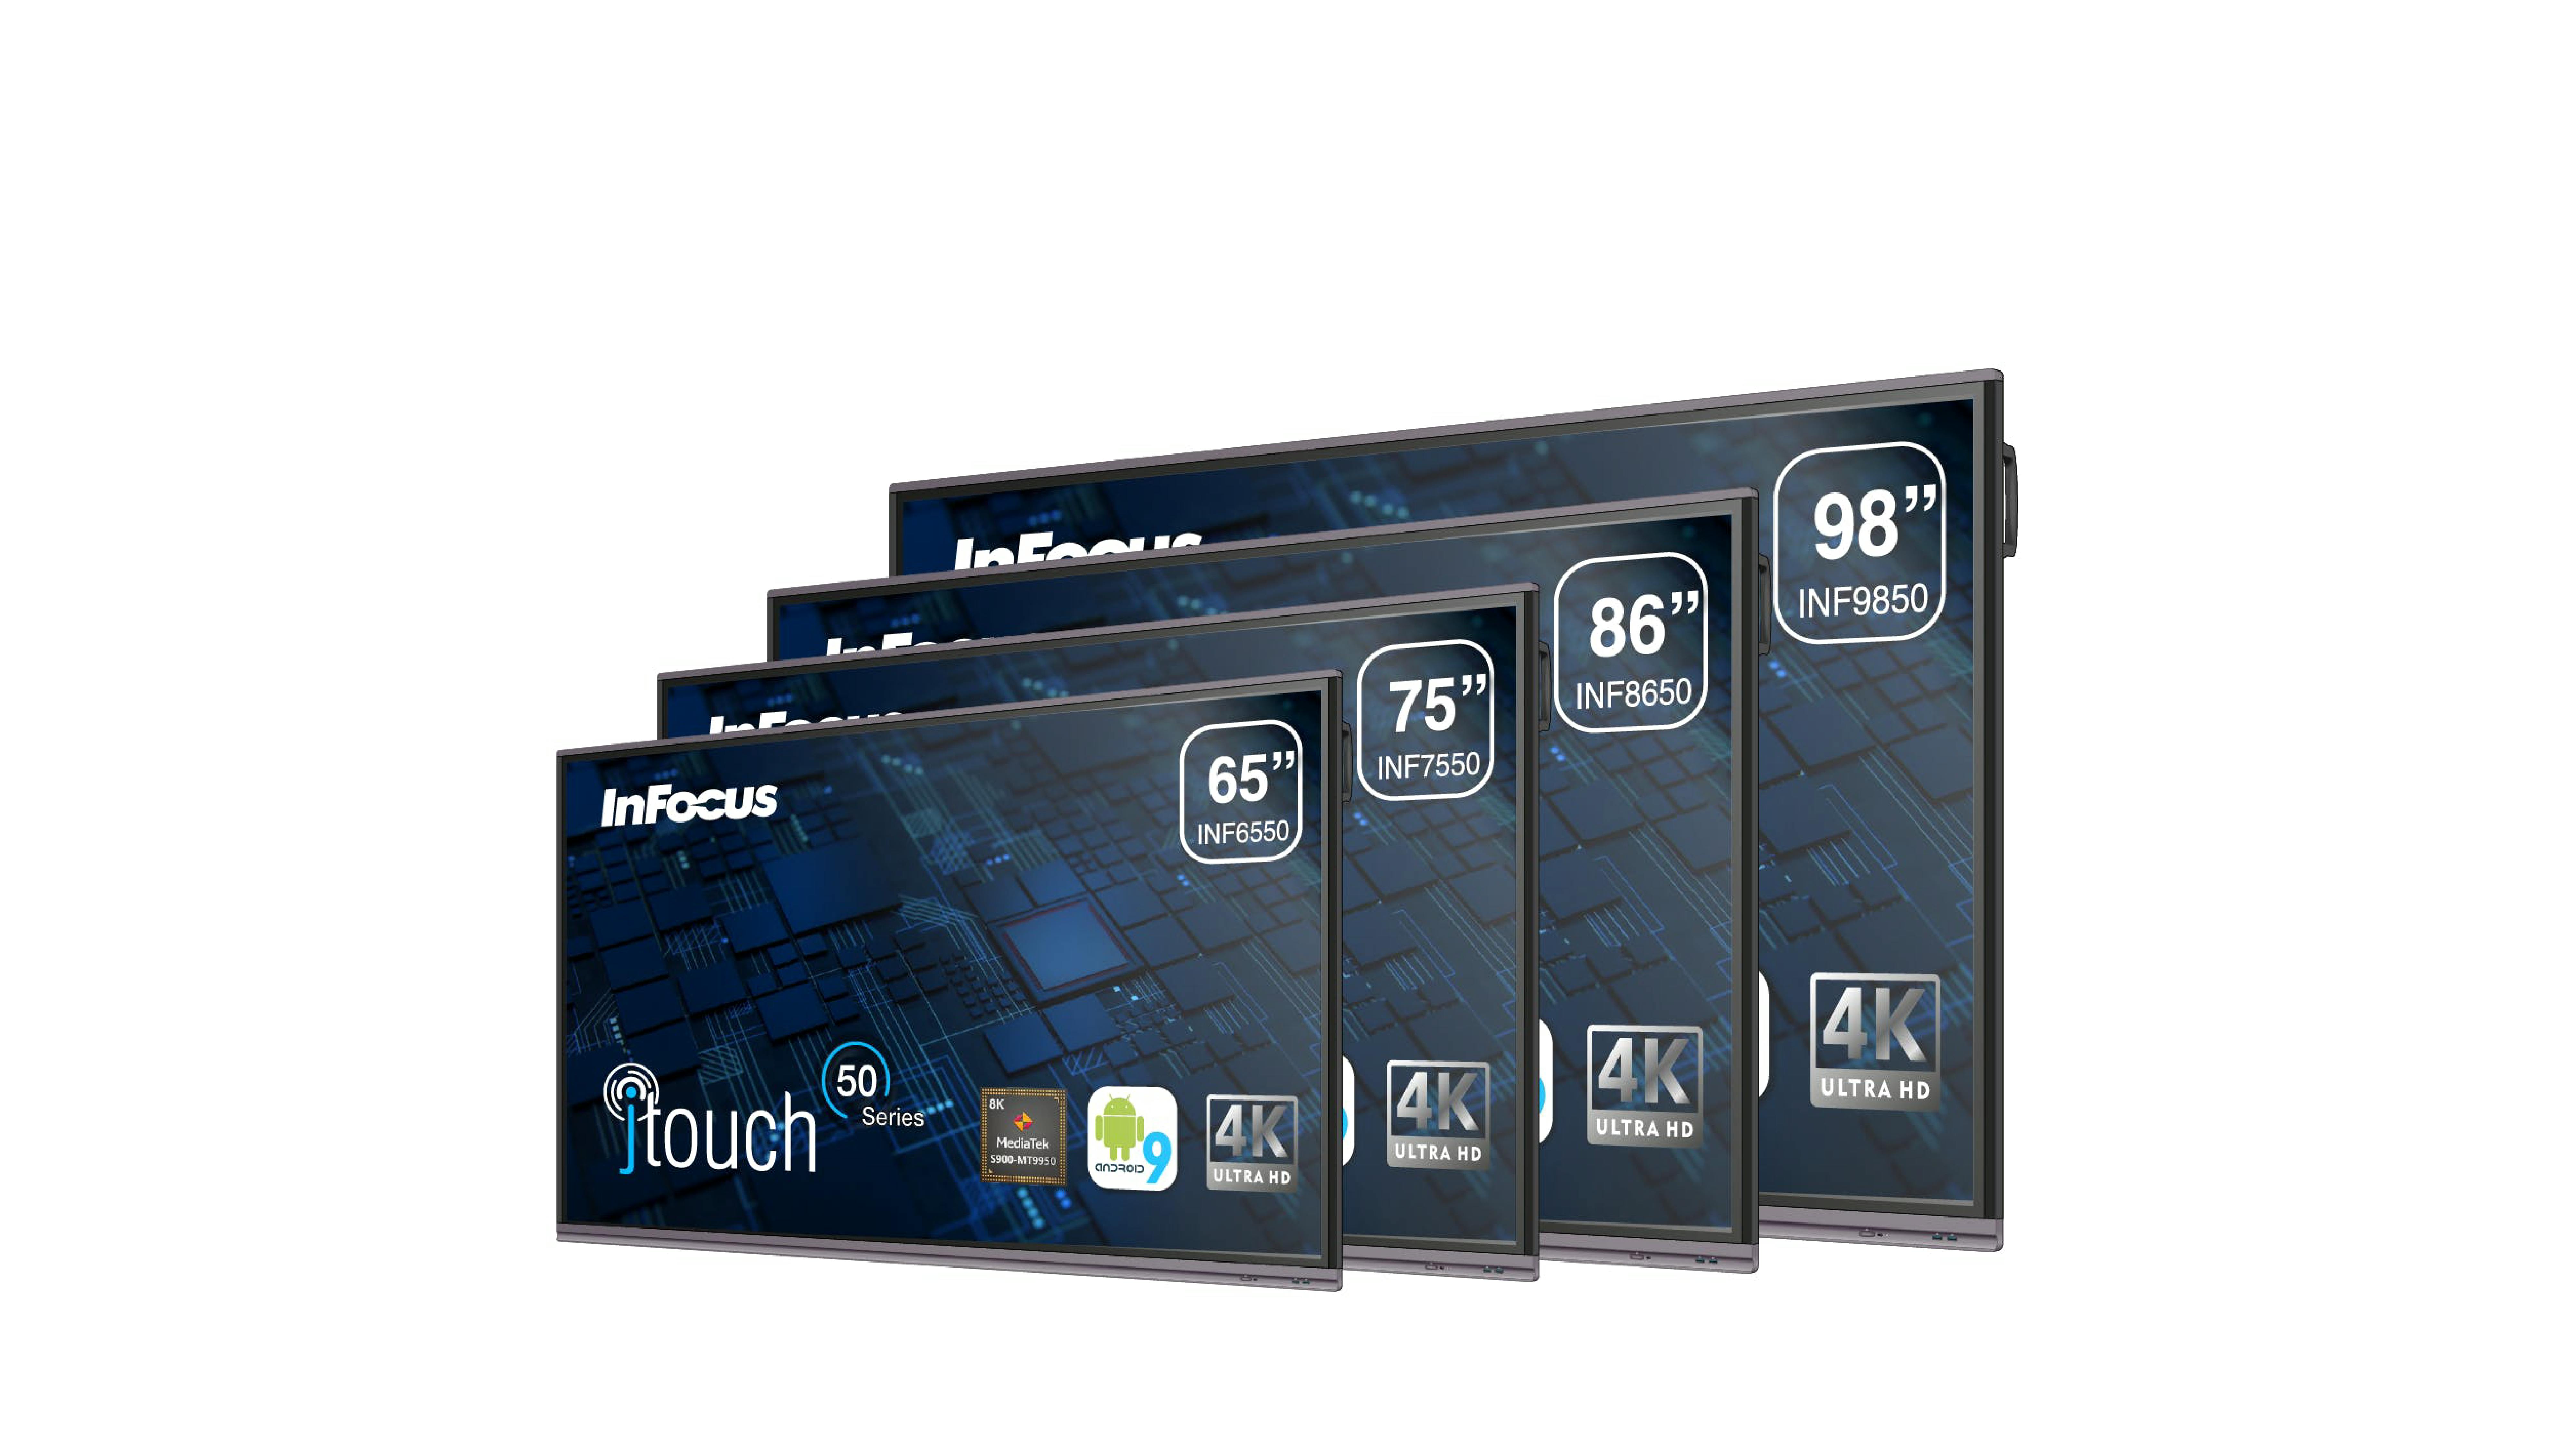 JTouch 50 Series - Experience the Performance 